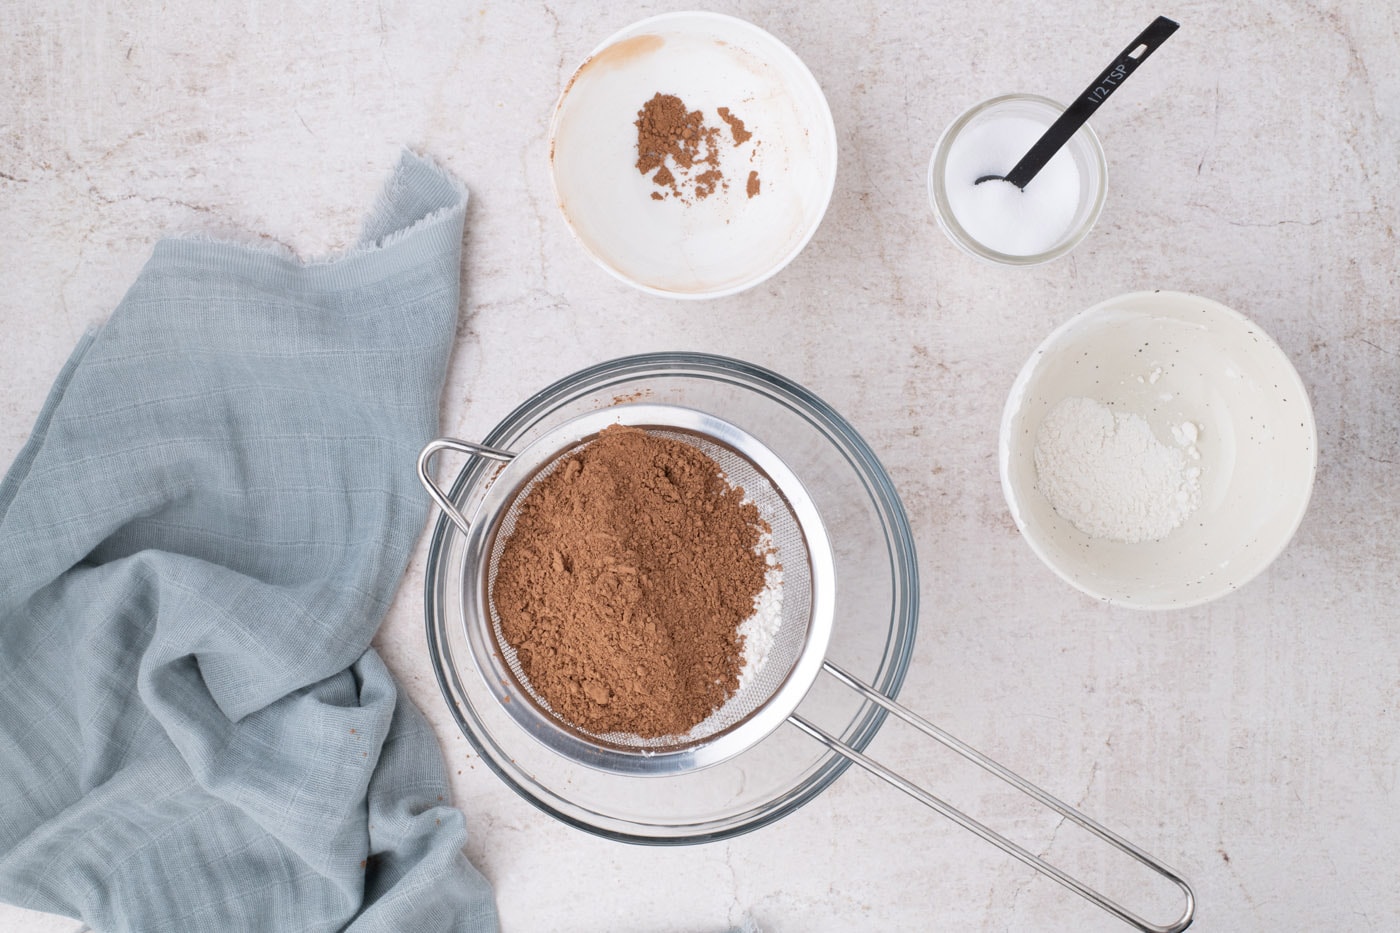 sifting flour and cocoa powder in a bowl